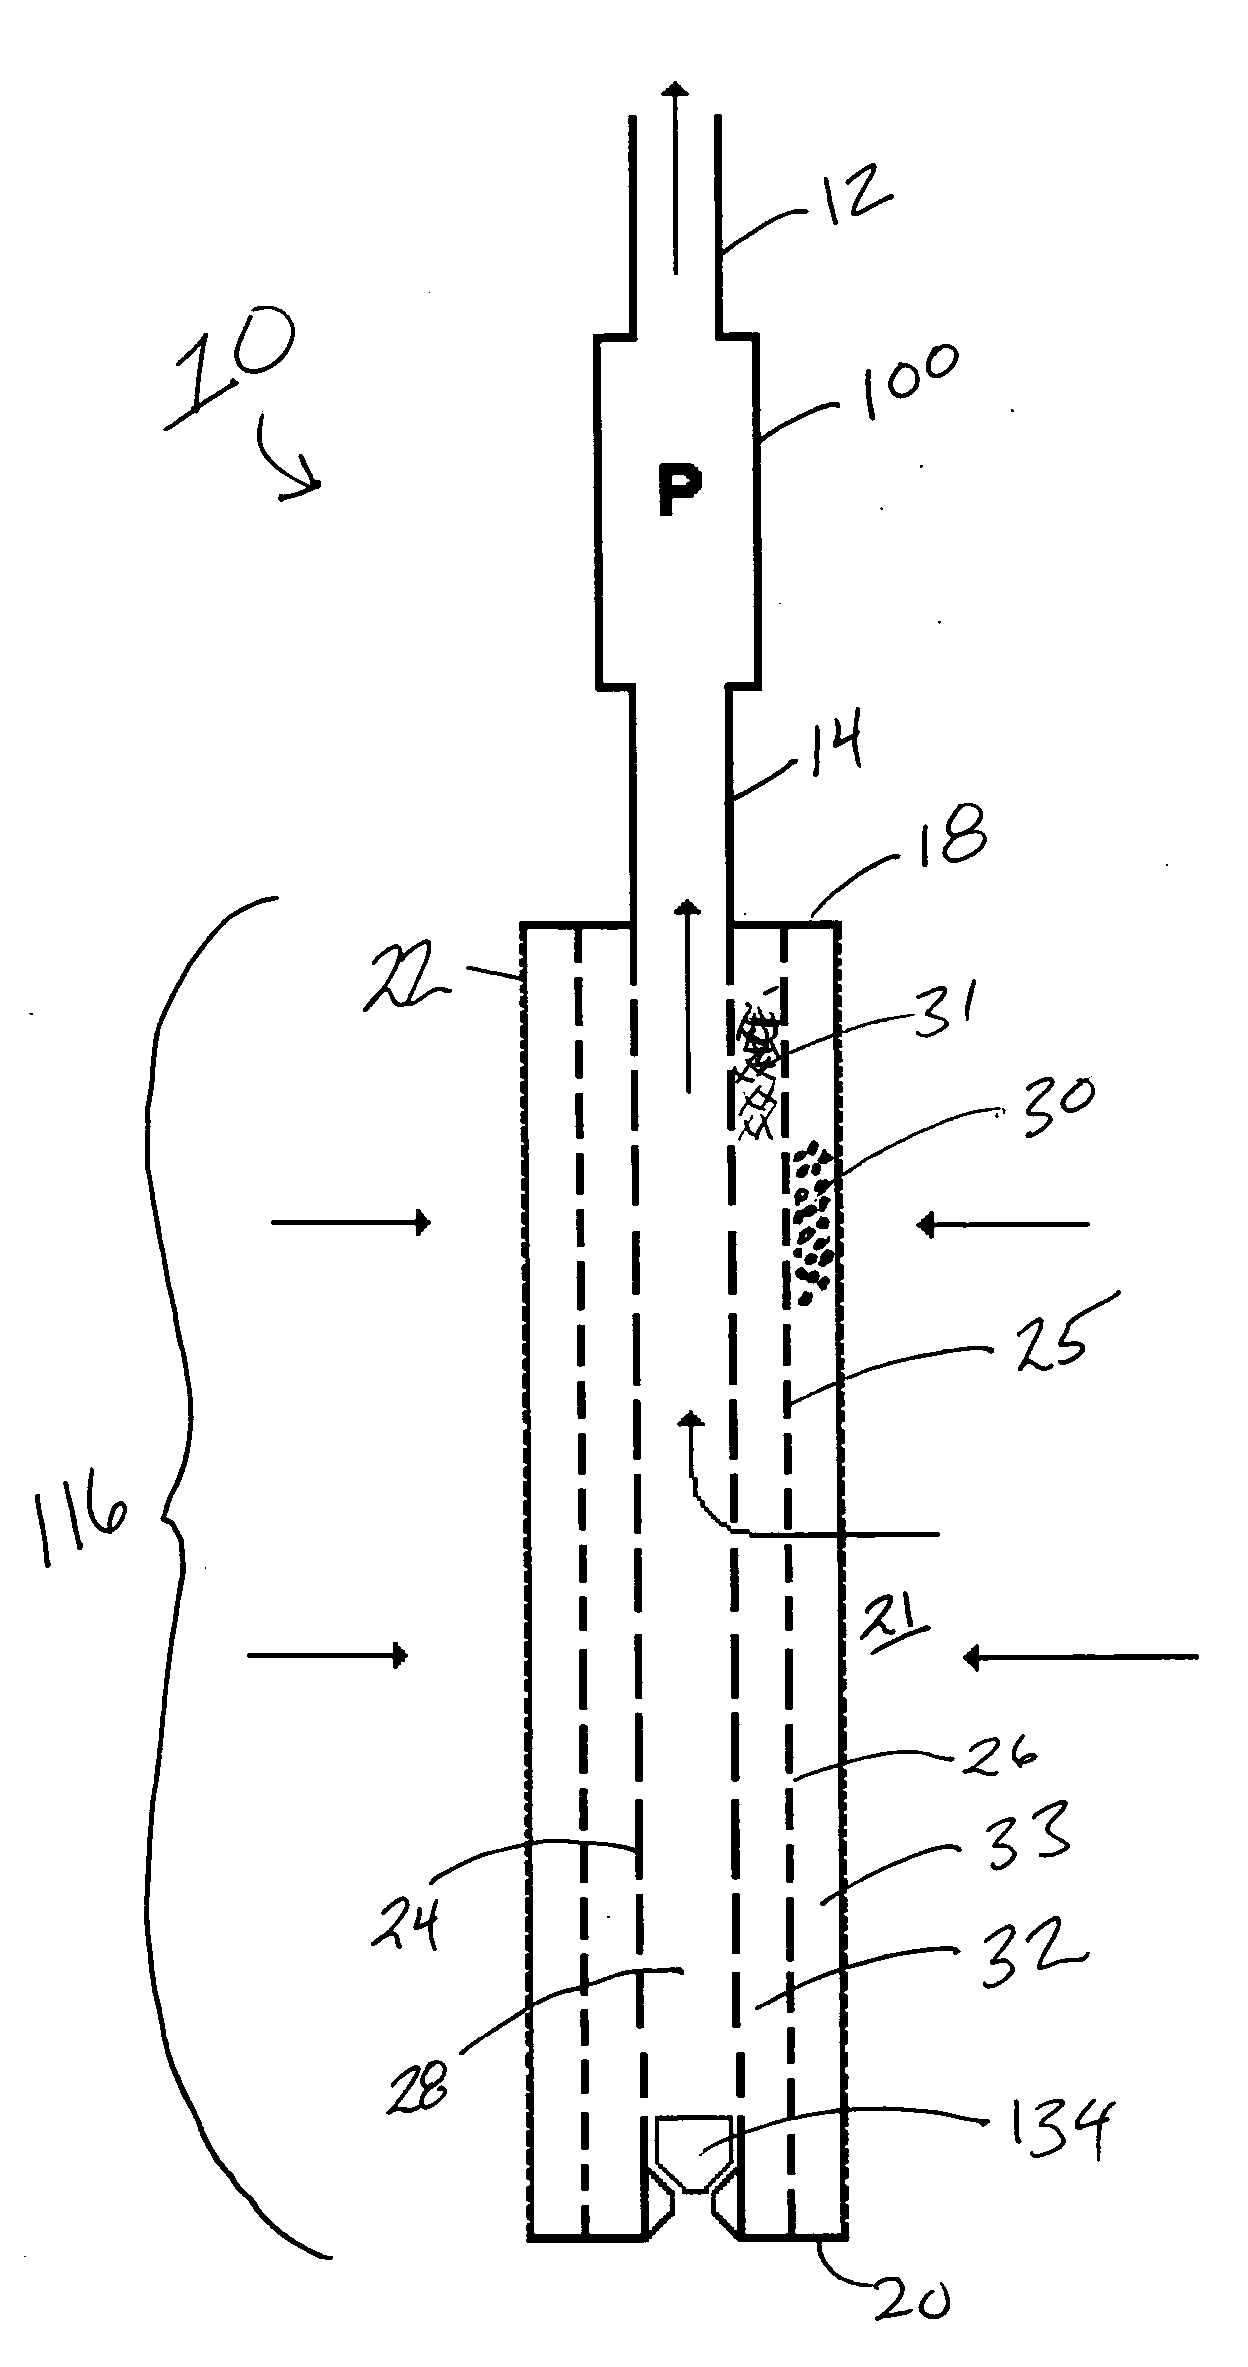 Method and apparatus for downhole artificial lift system protection